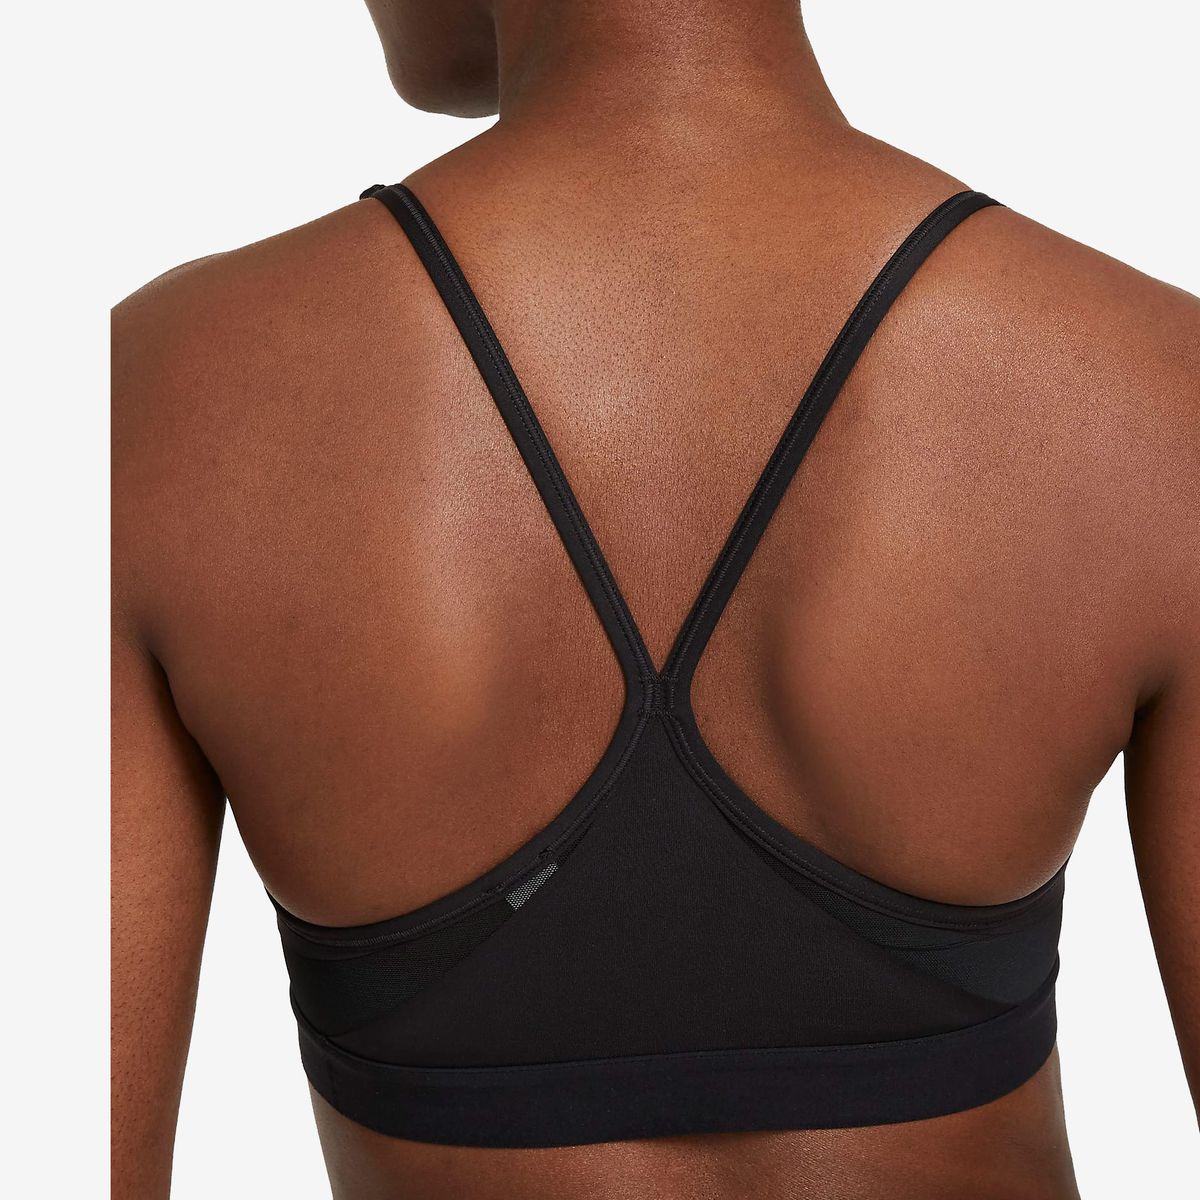 SPORTTIN Sports Bra for Women High or Low Impact Cross-Back Yoga Bras with Removable Pad 